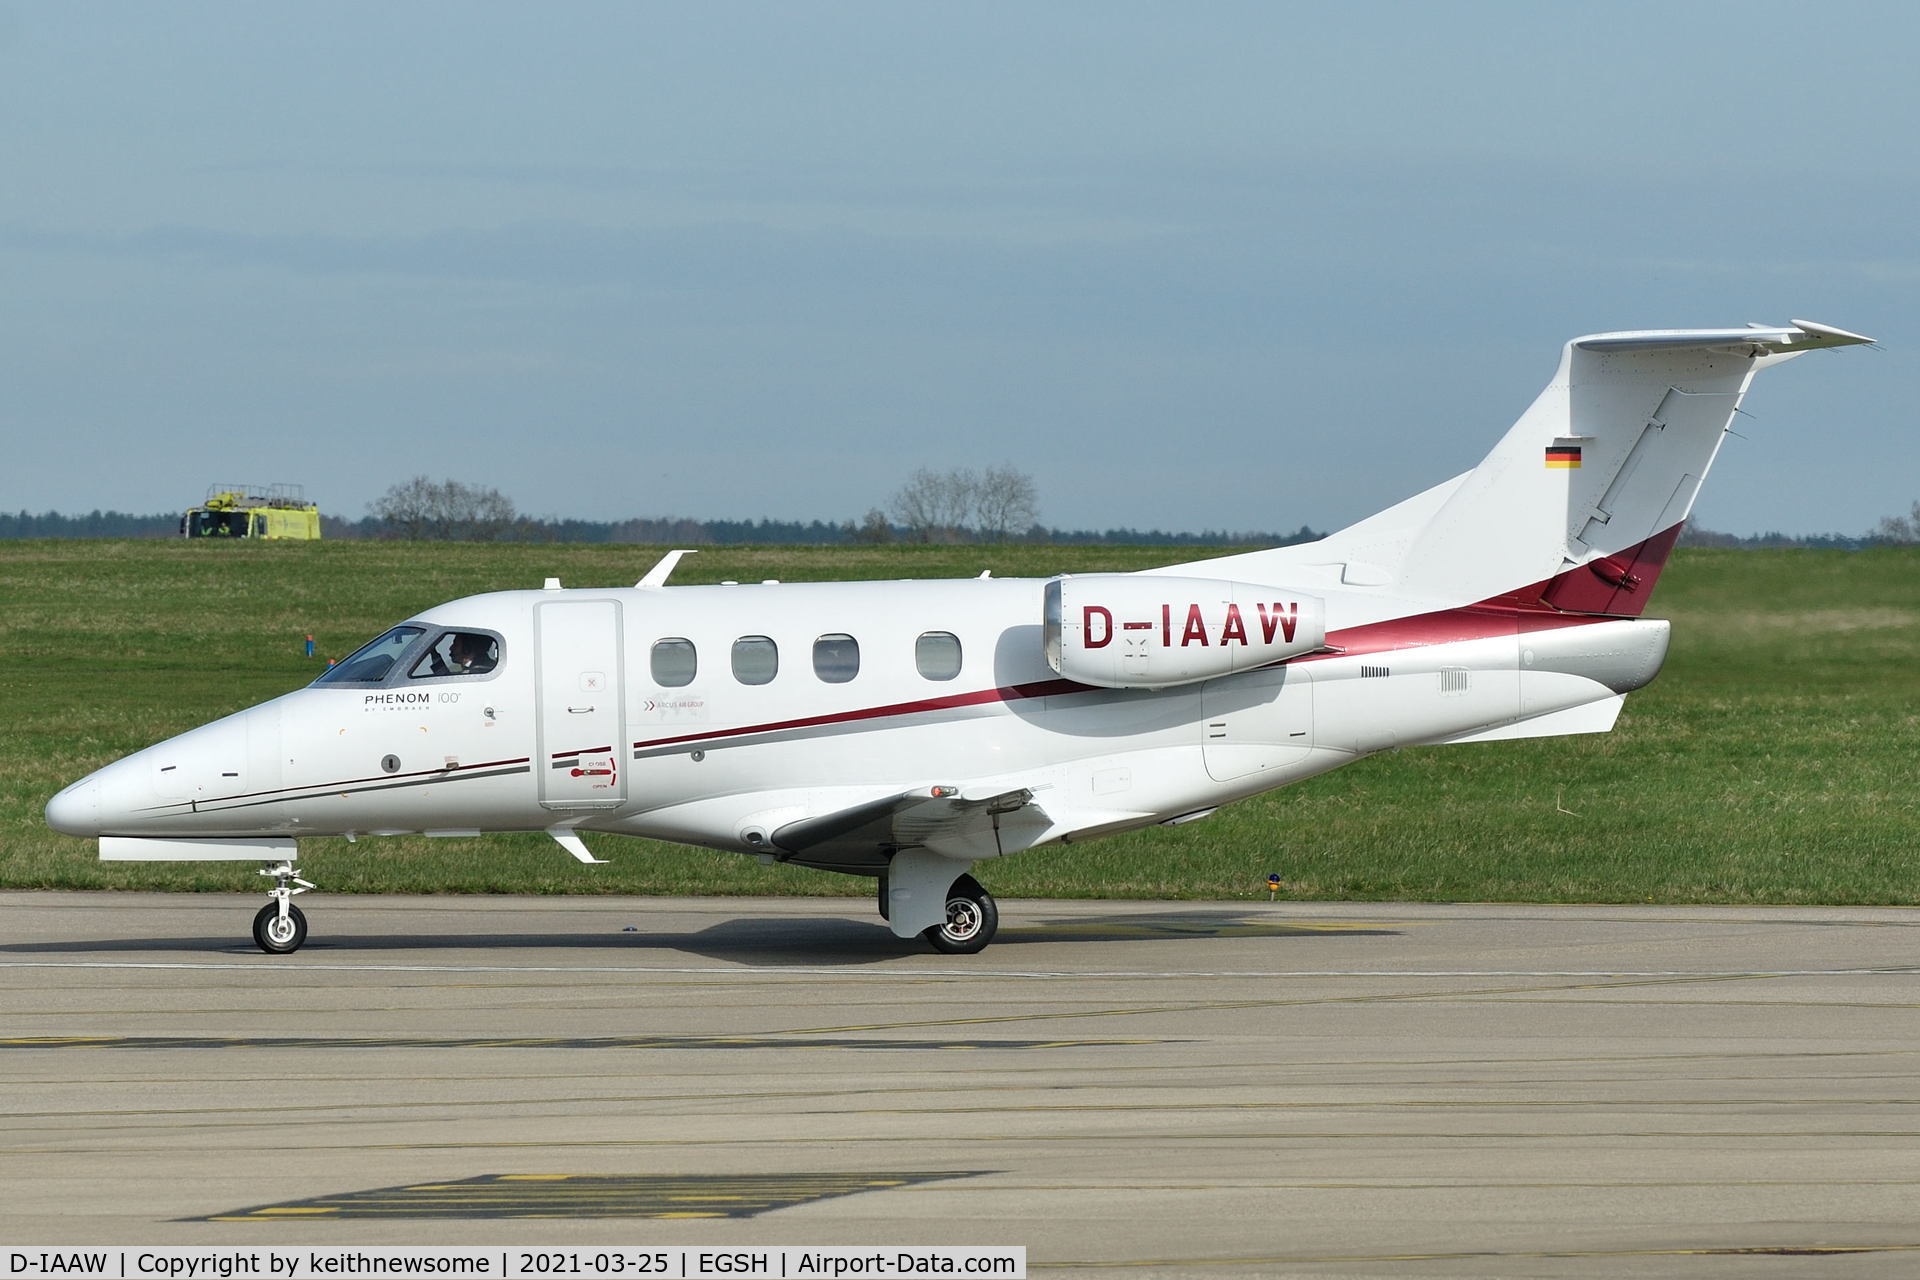 D-IAAW, 2011 Embraer EMB-500 Phenom 100 C/N 50000245, Arriving at Norwich from Nice, France.